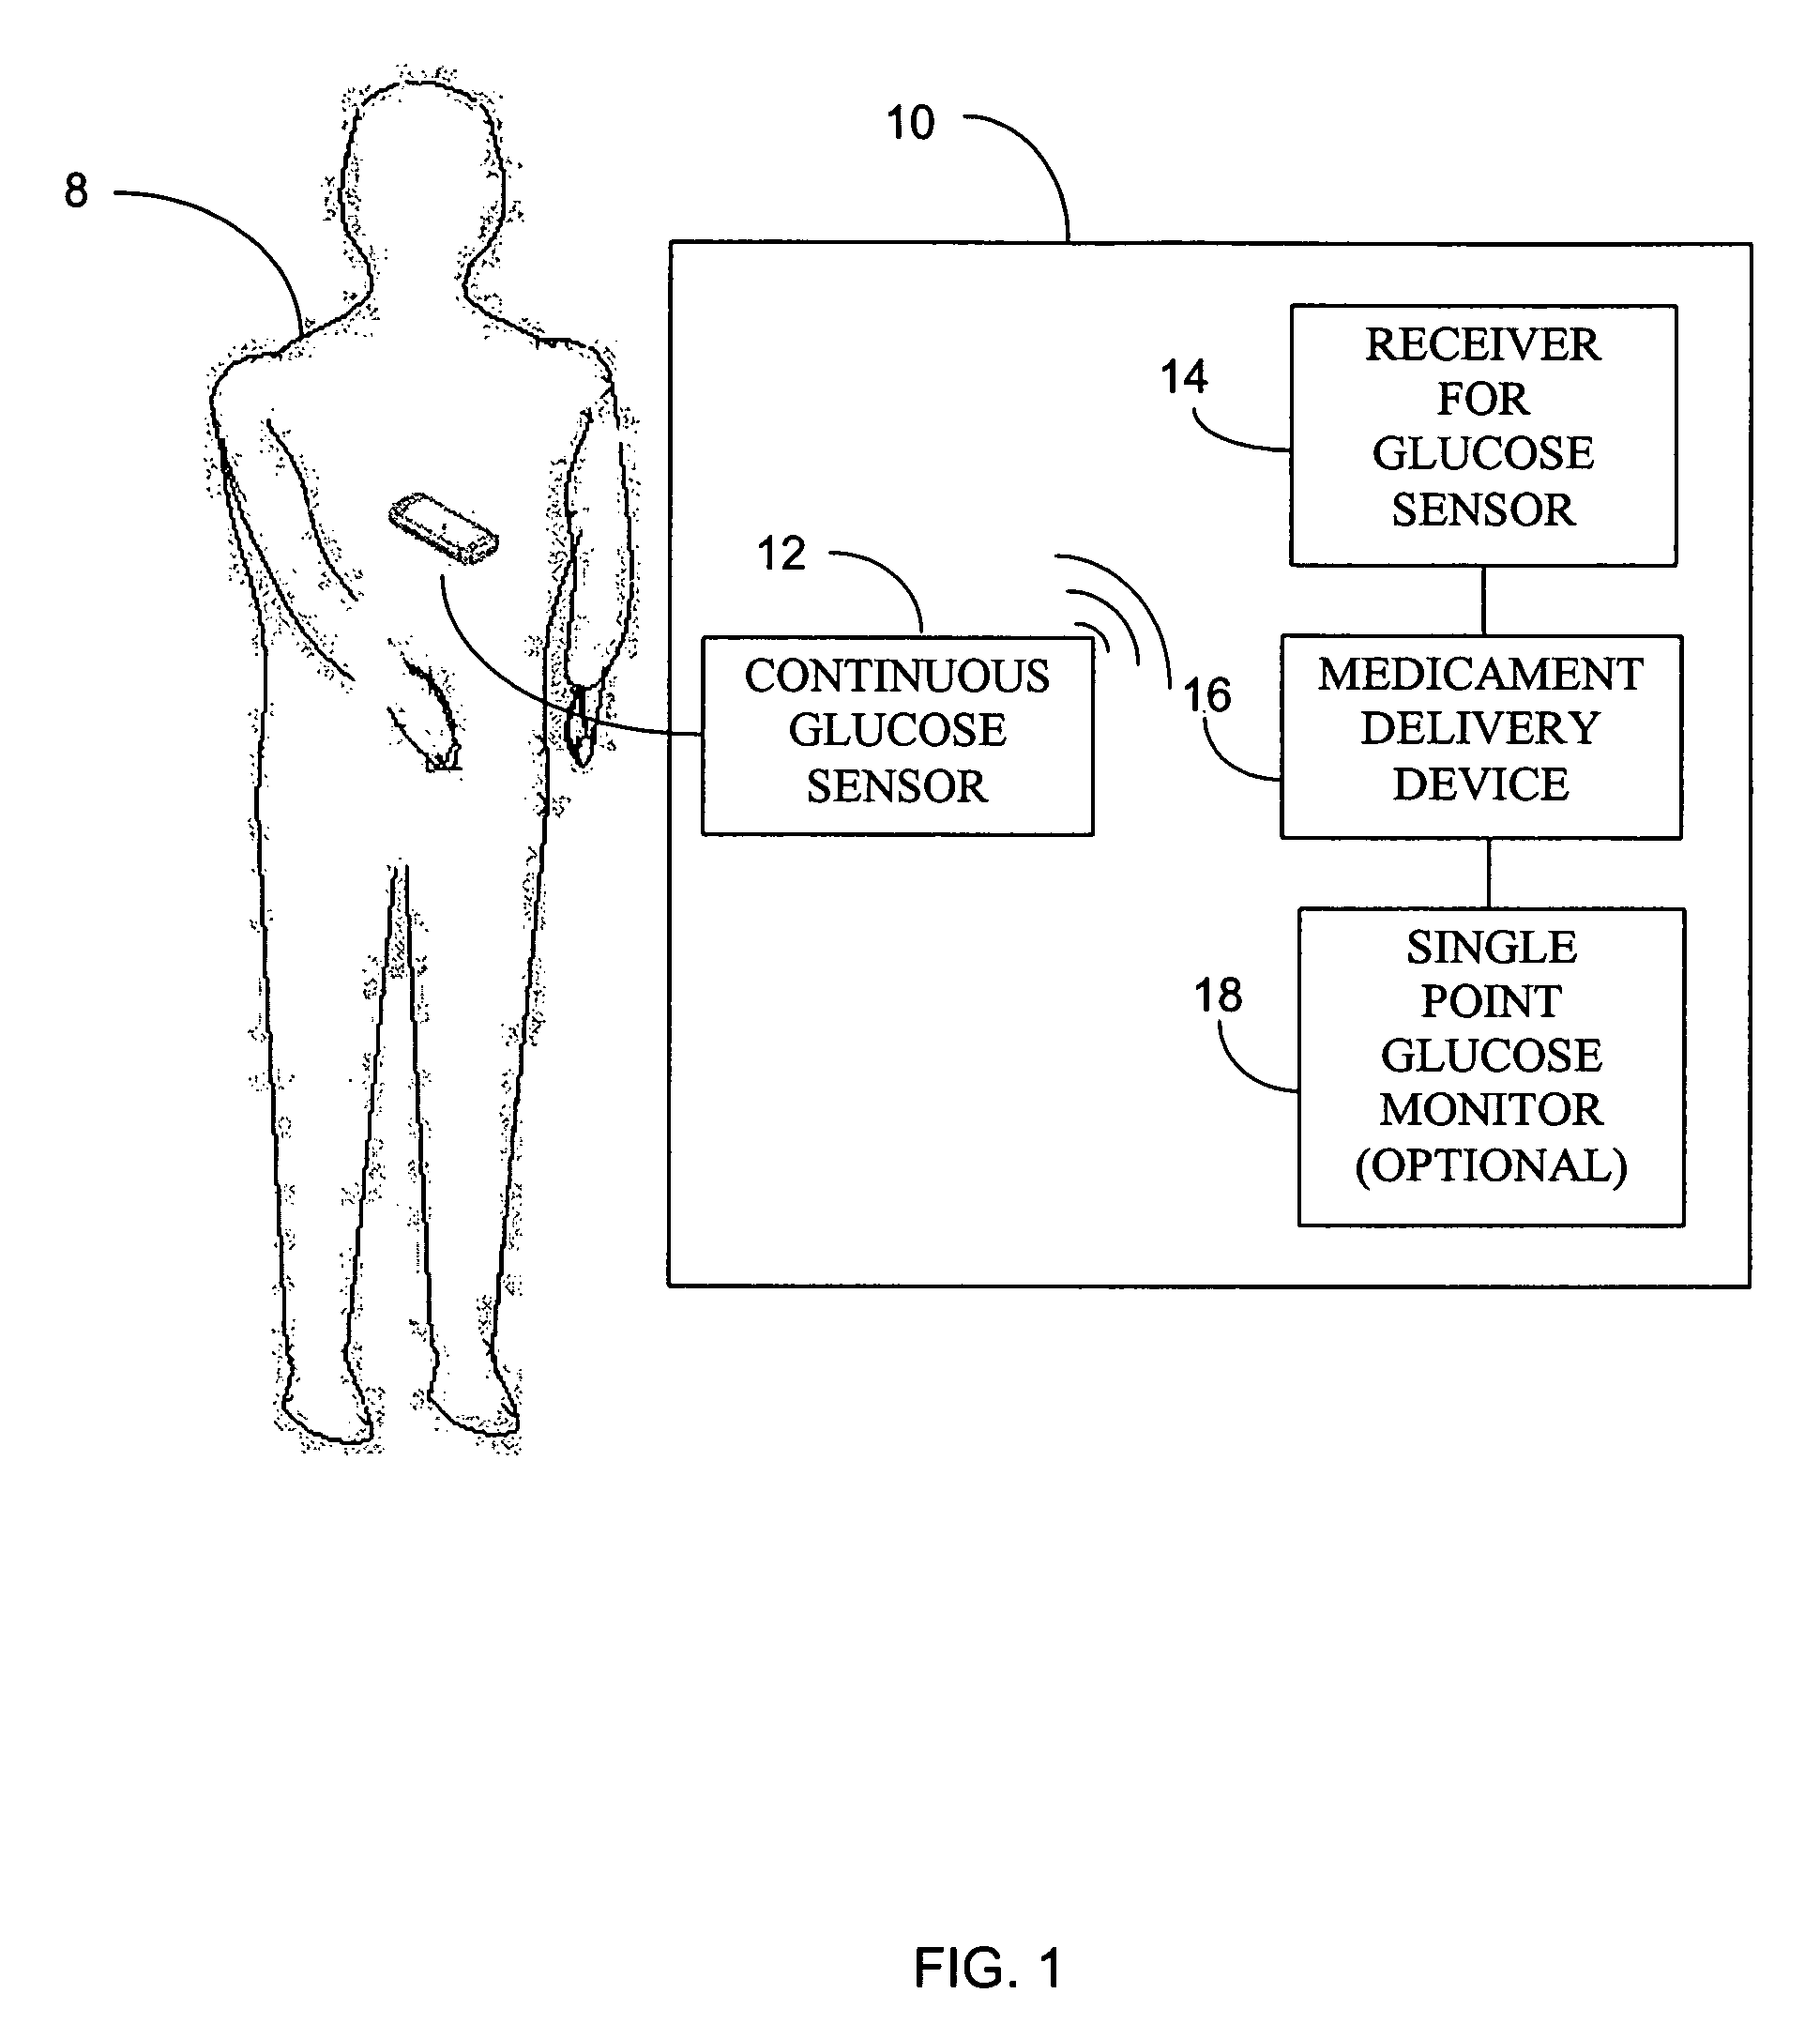 Integrated delivery device for continuous glucose sensor